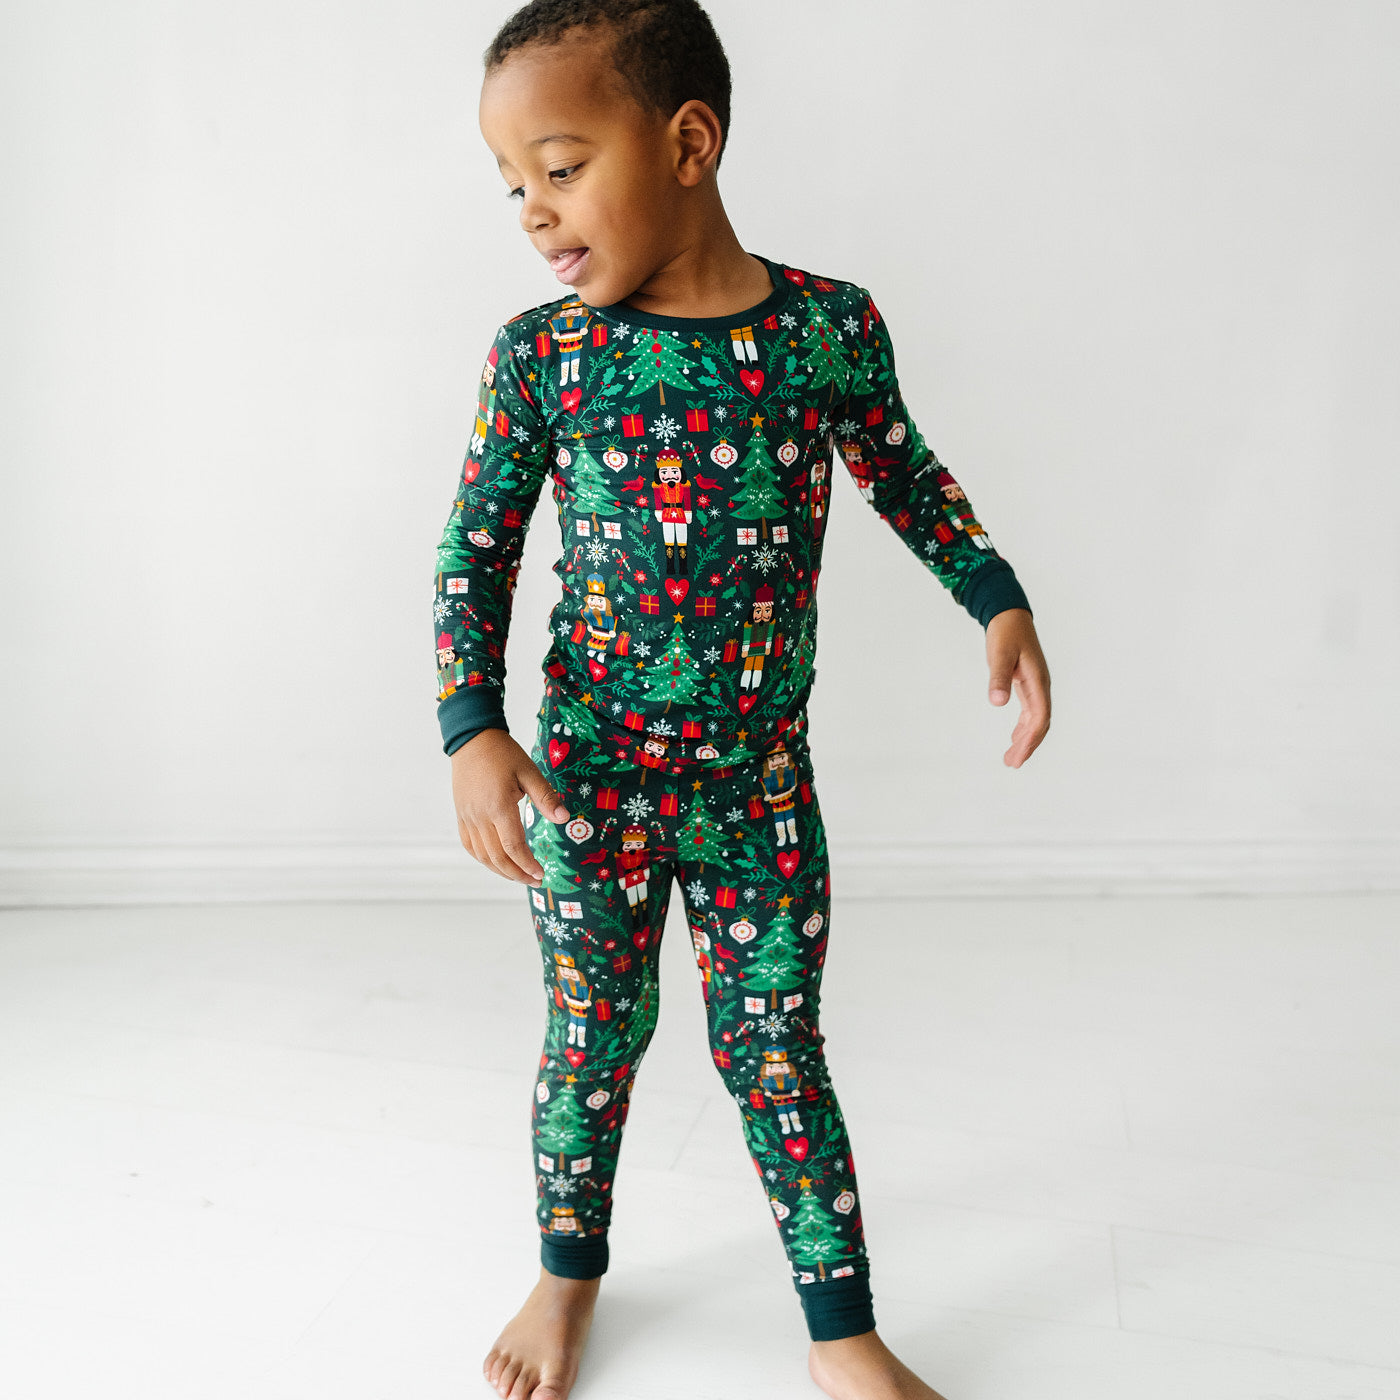 Alternate image of a child wearing a Night at the Nutcracker two piece pajama set